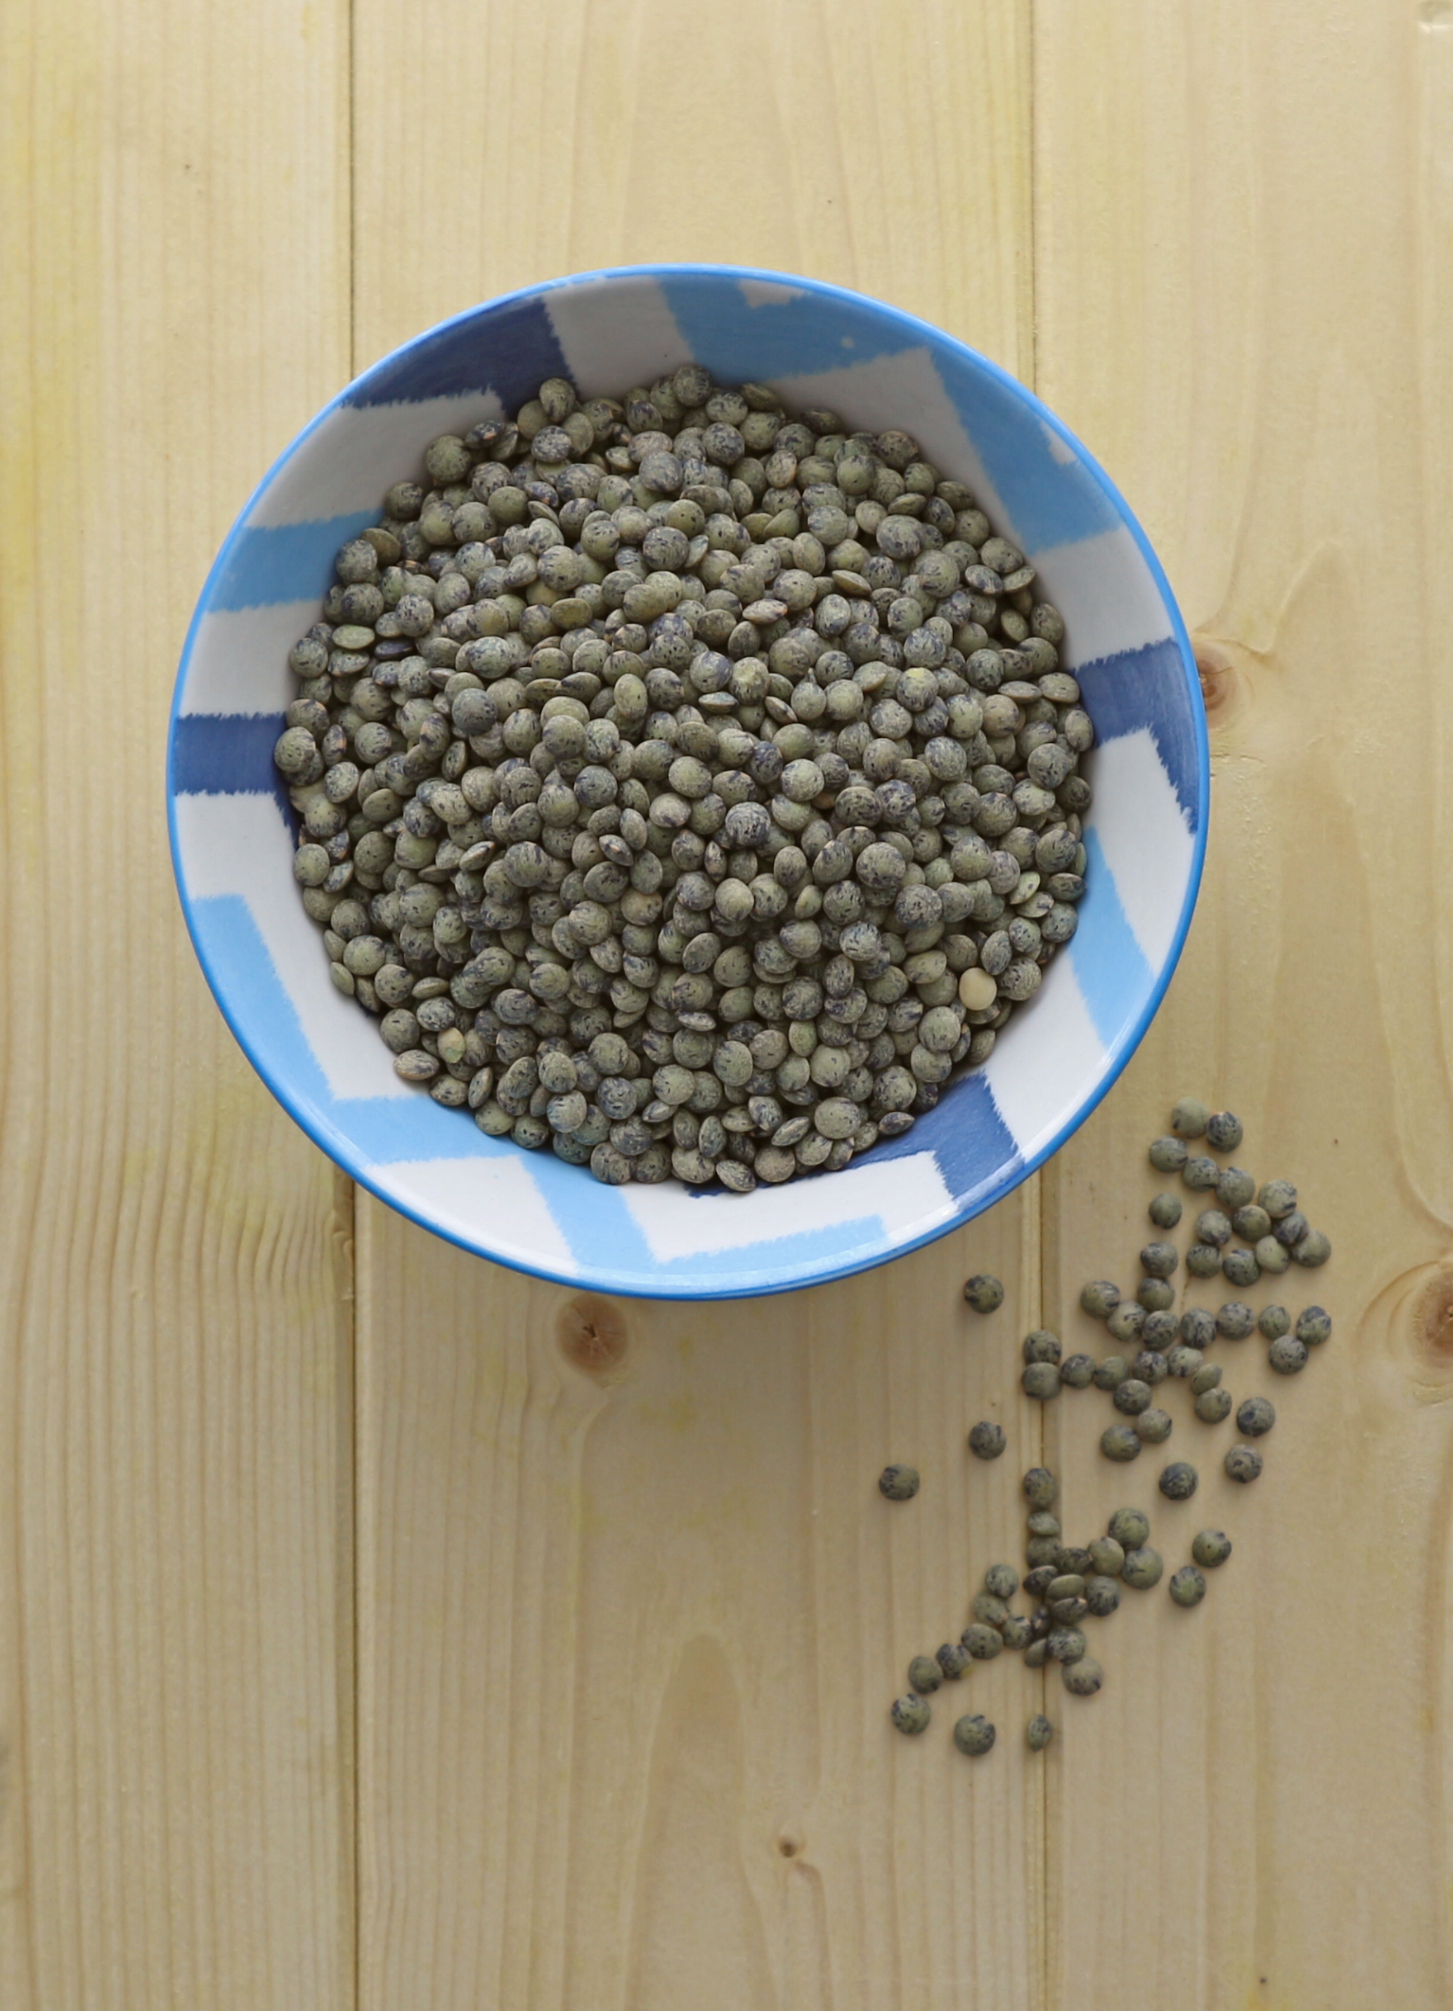 Green Lentils in a blue bowl on a wood surface.